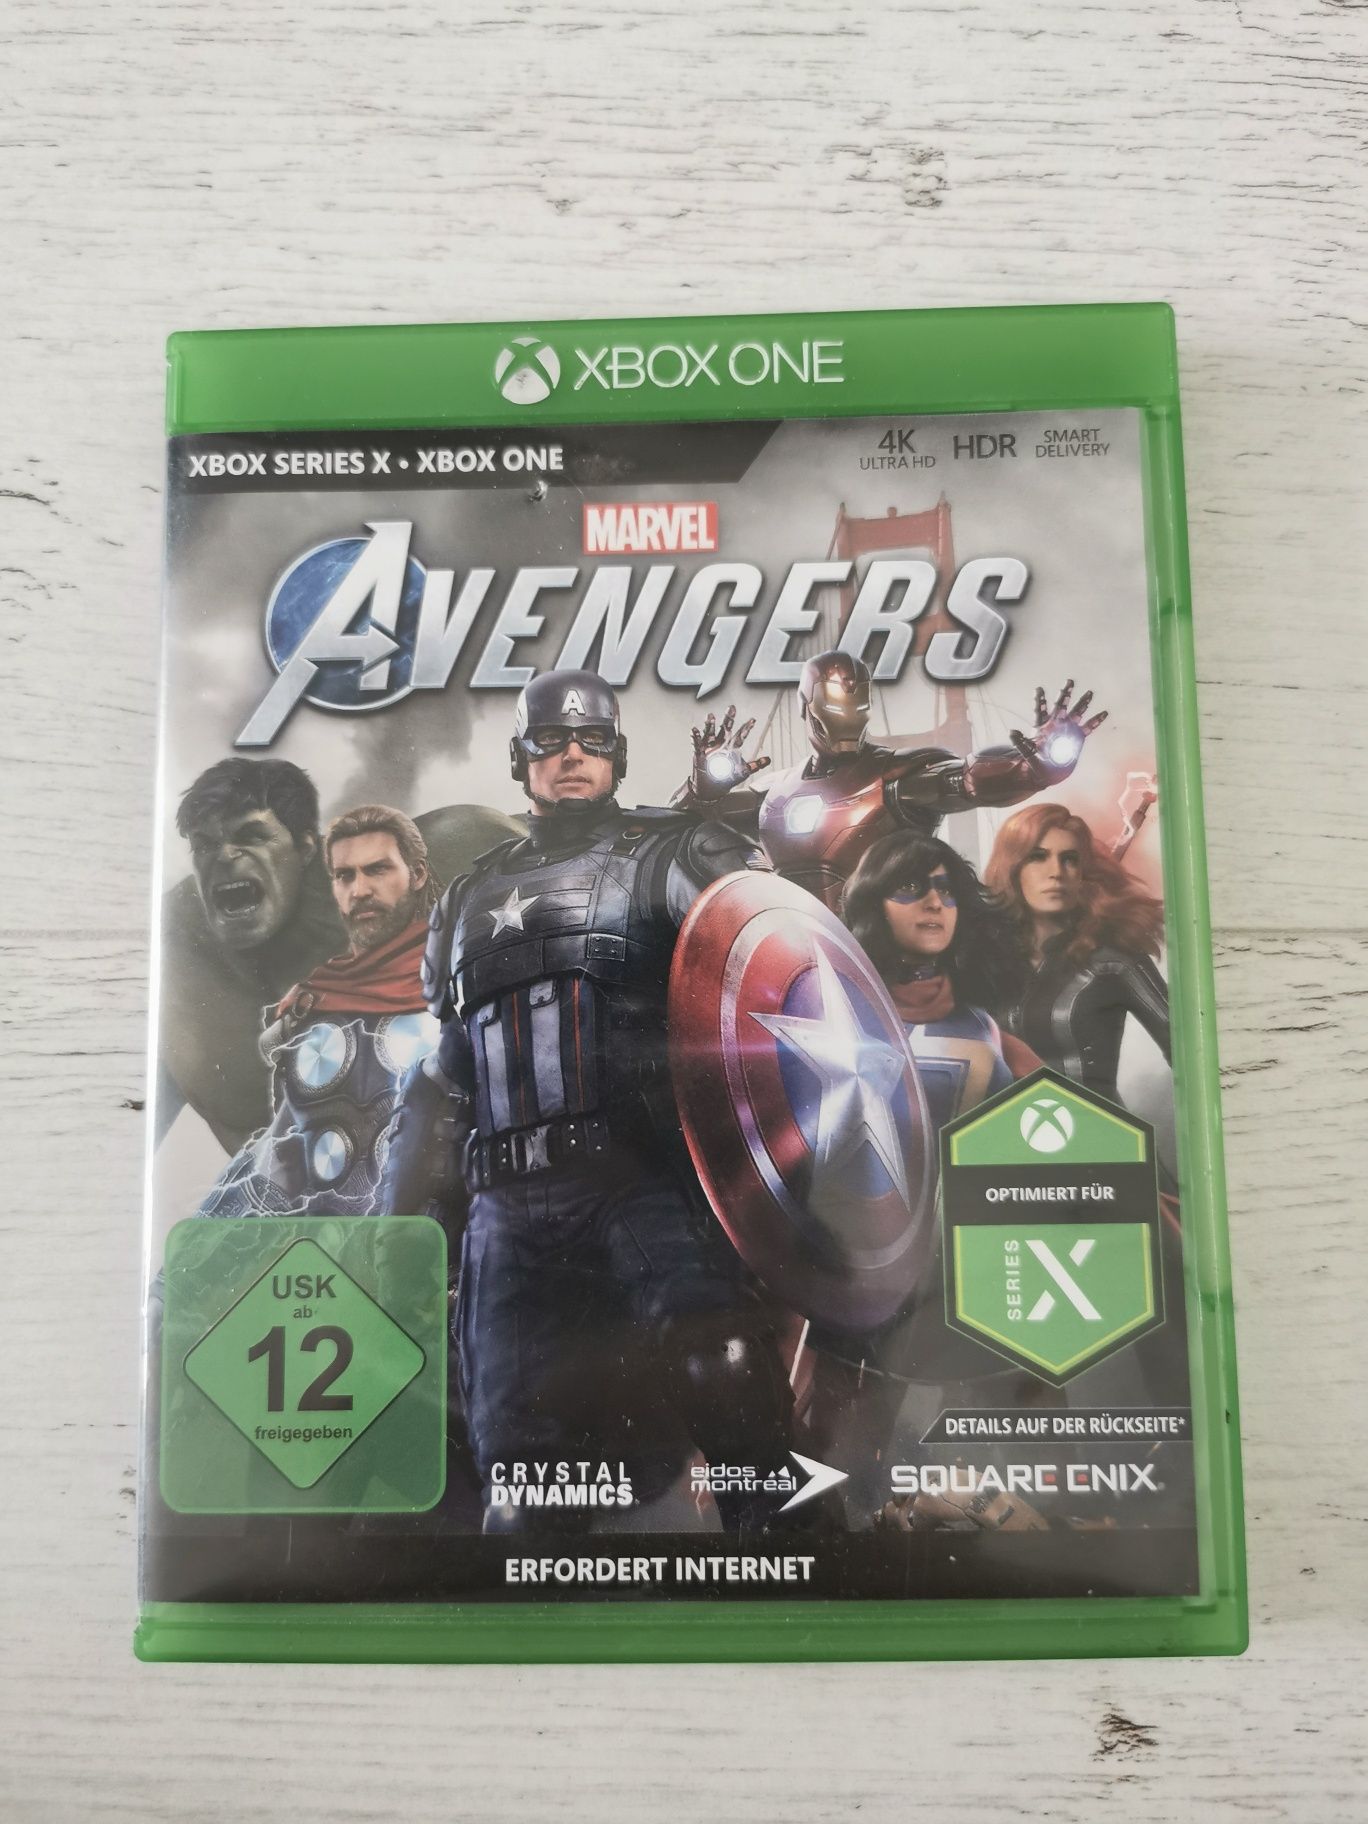 Gry XBOX ONE assassin's nfs naruto Avengers just sing